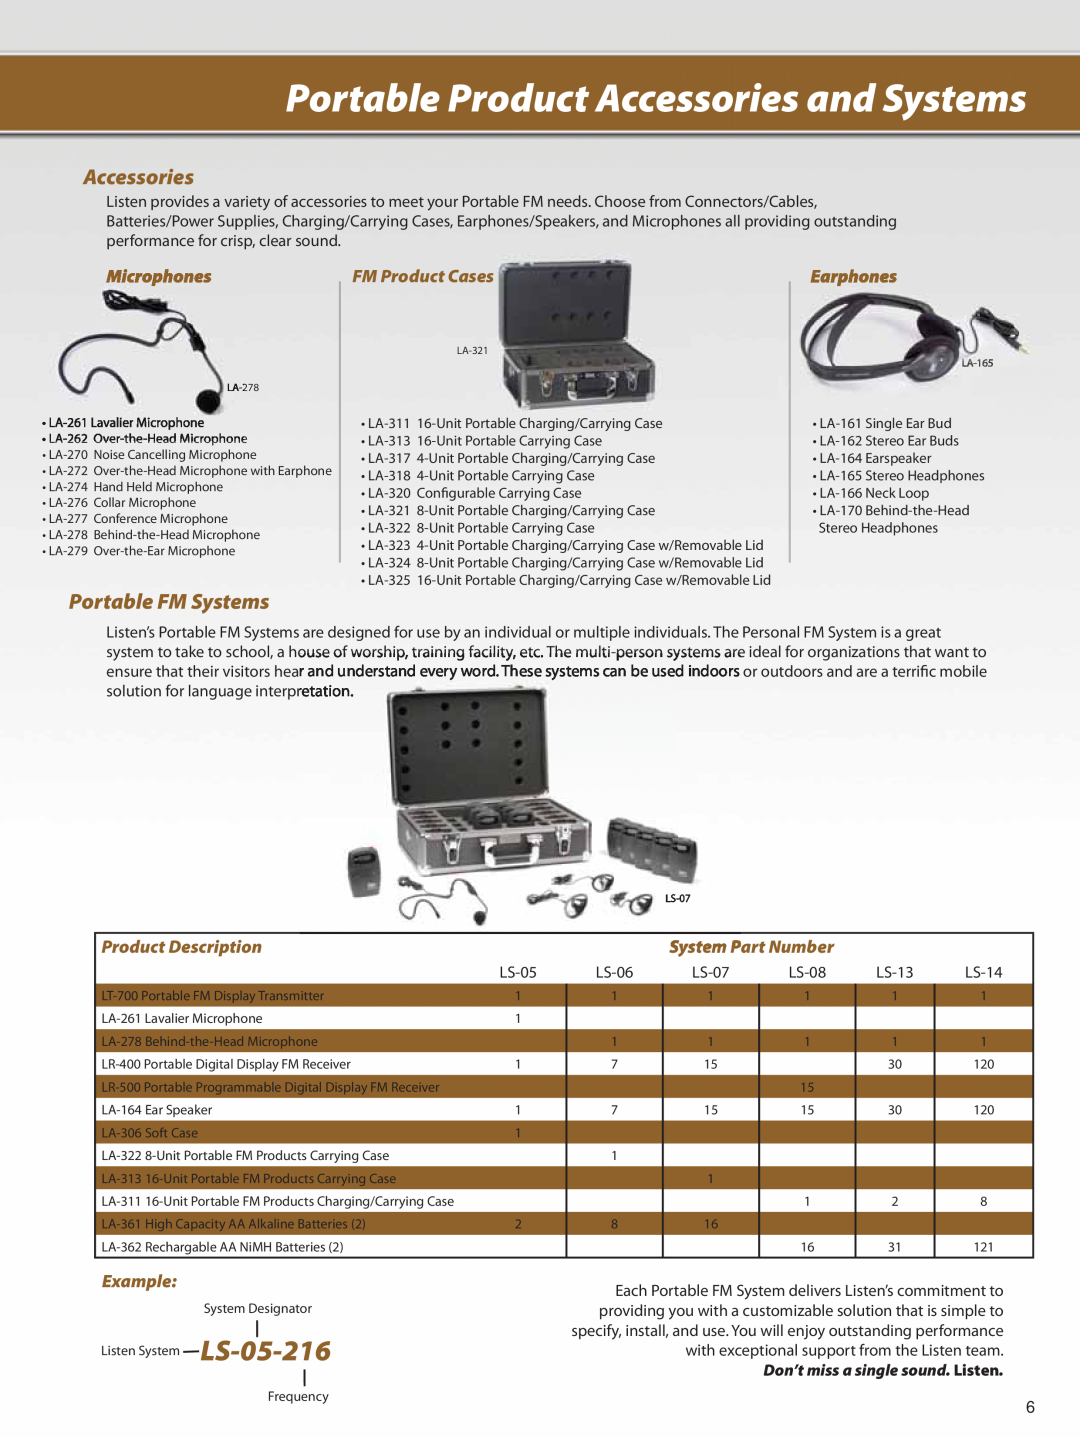 Listen Technologies Portable Product Accessories and Systems, Portable FM Systems, Microphones, FM Product Cases, LS-06 